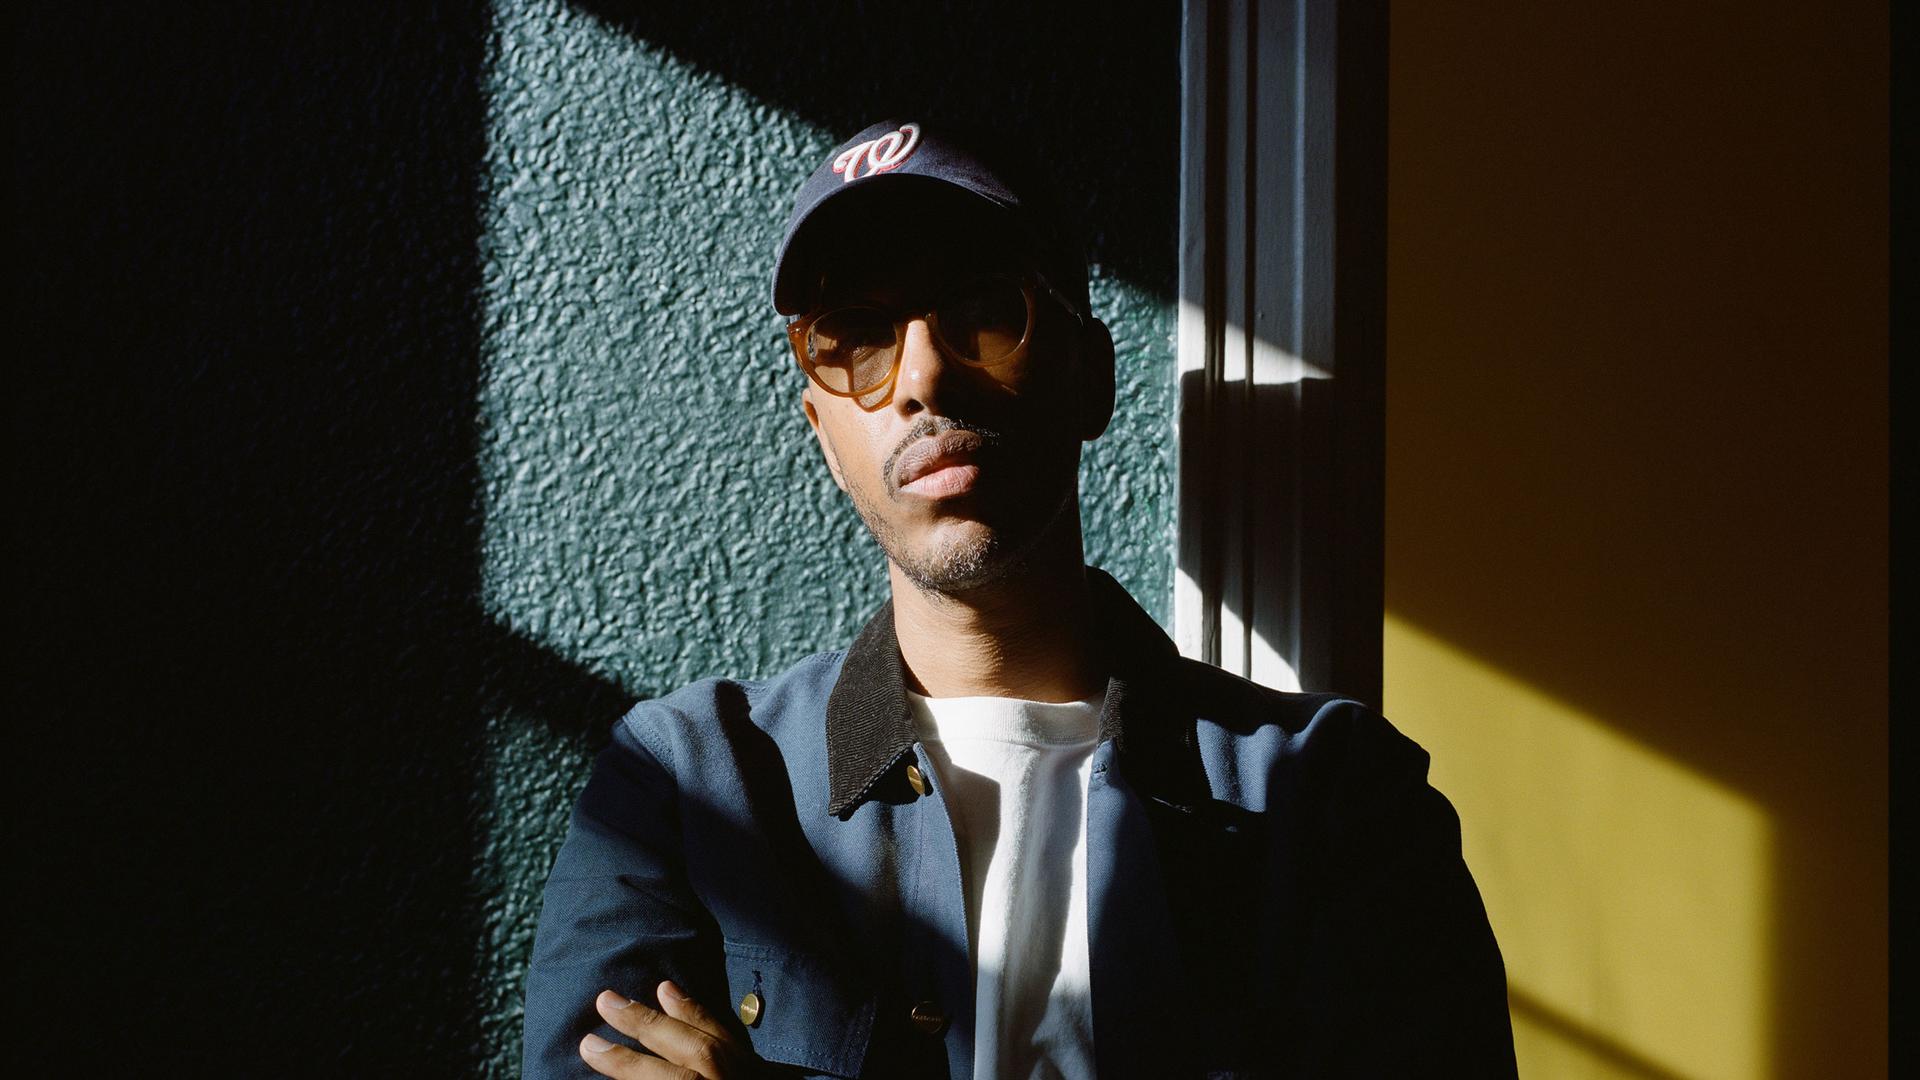 DMV rapper and record producer Oddisee realized early on that purpose and success are self-designated.